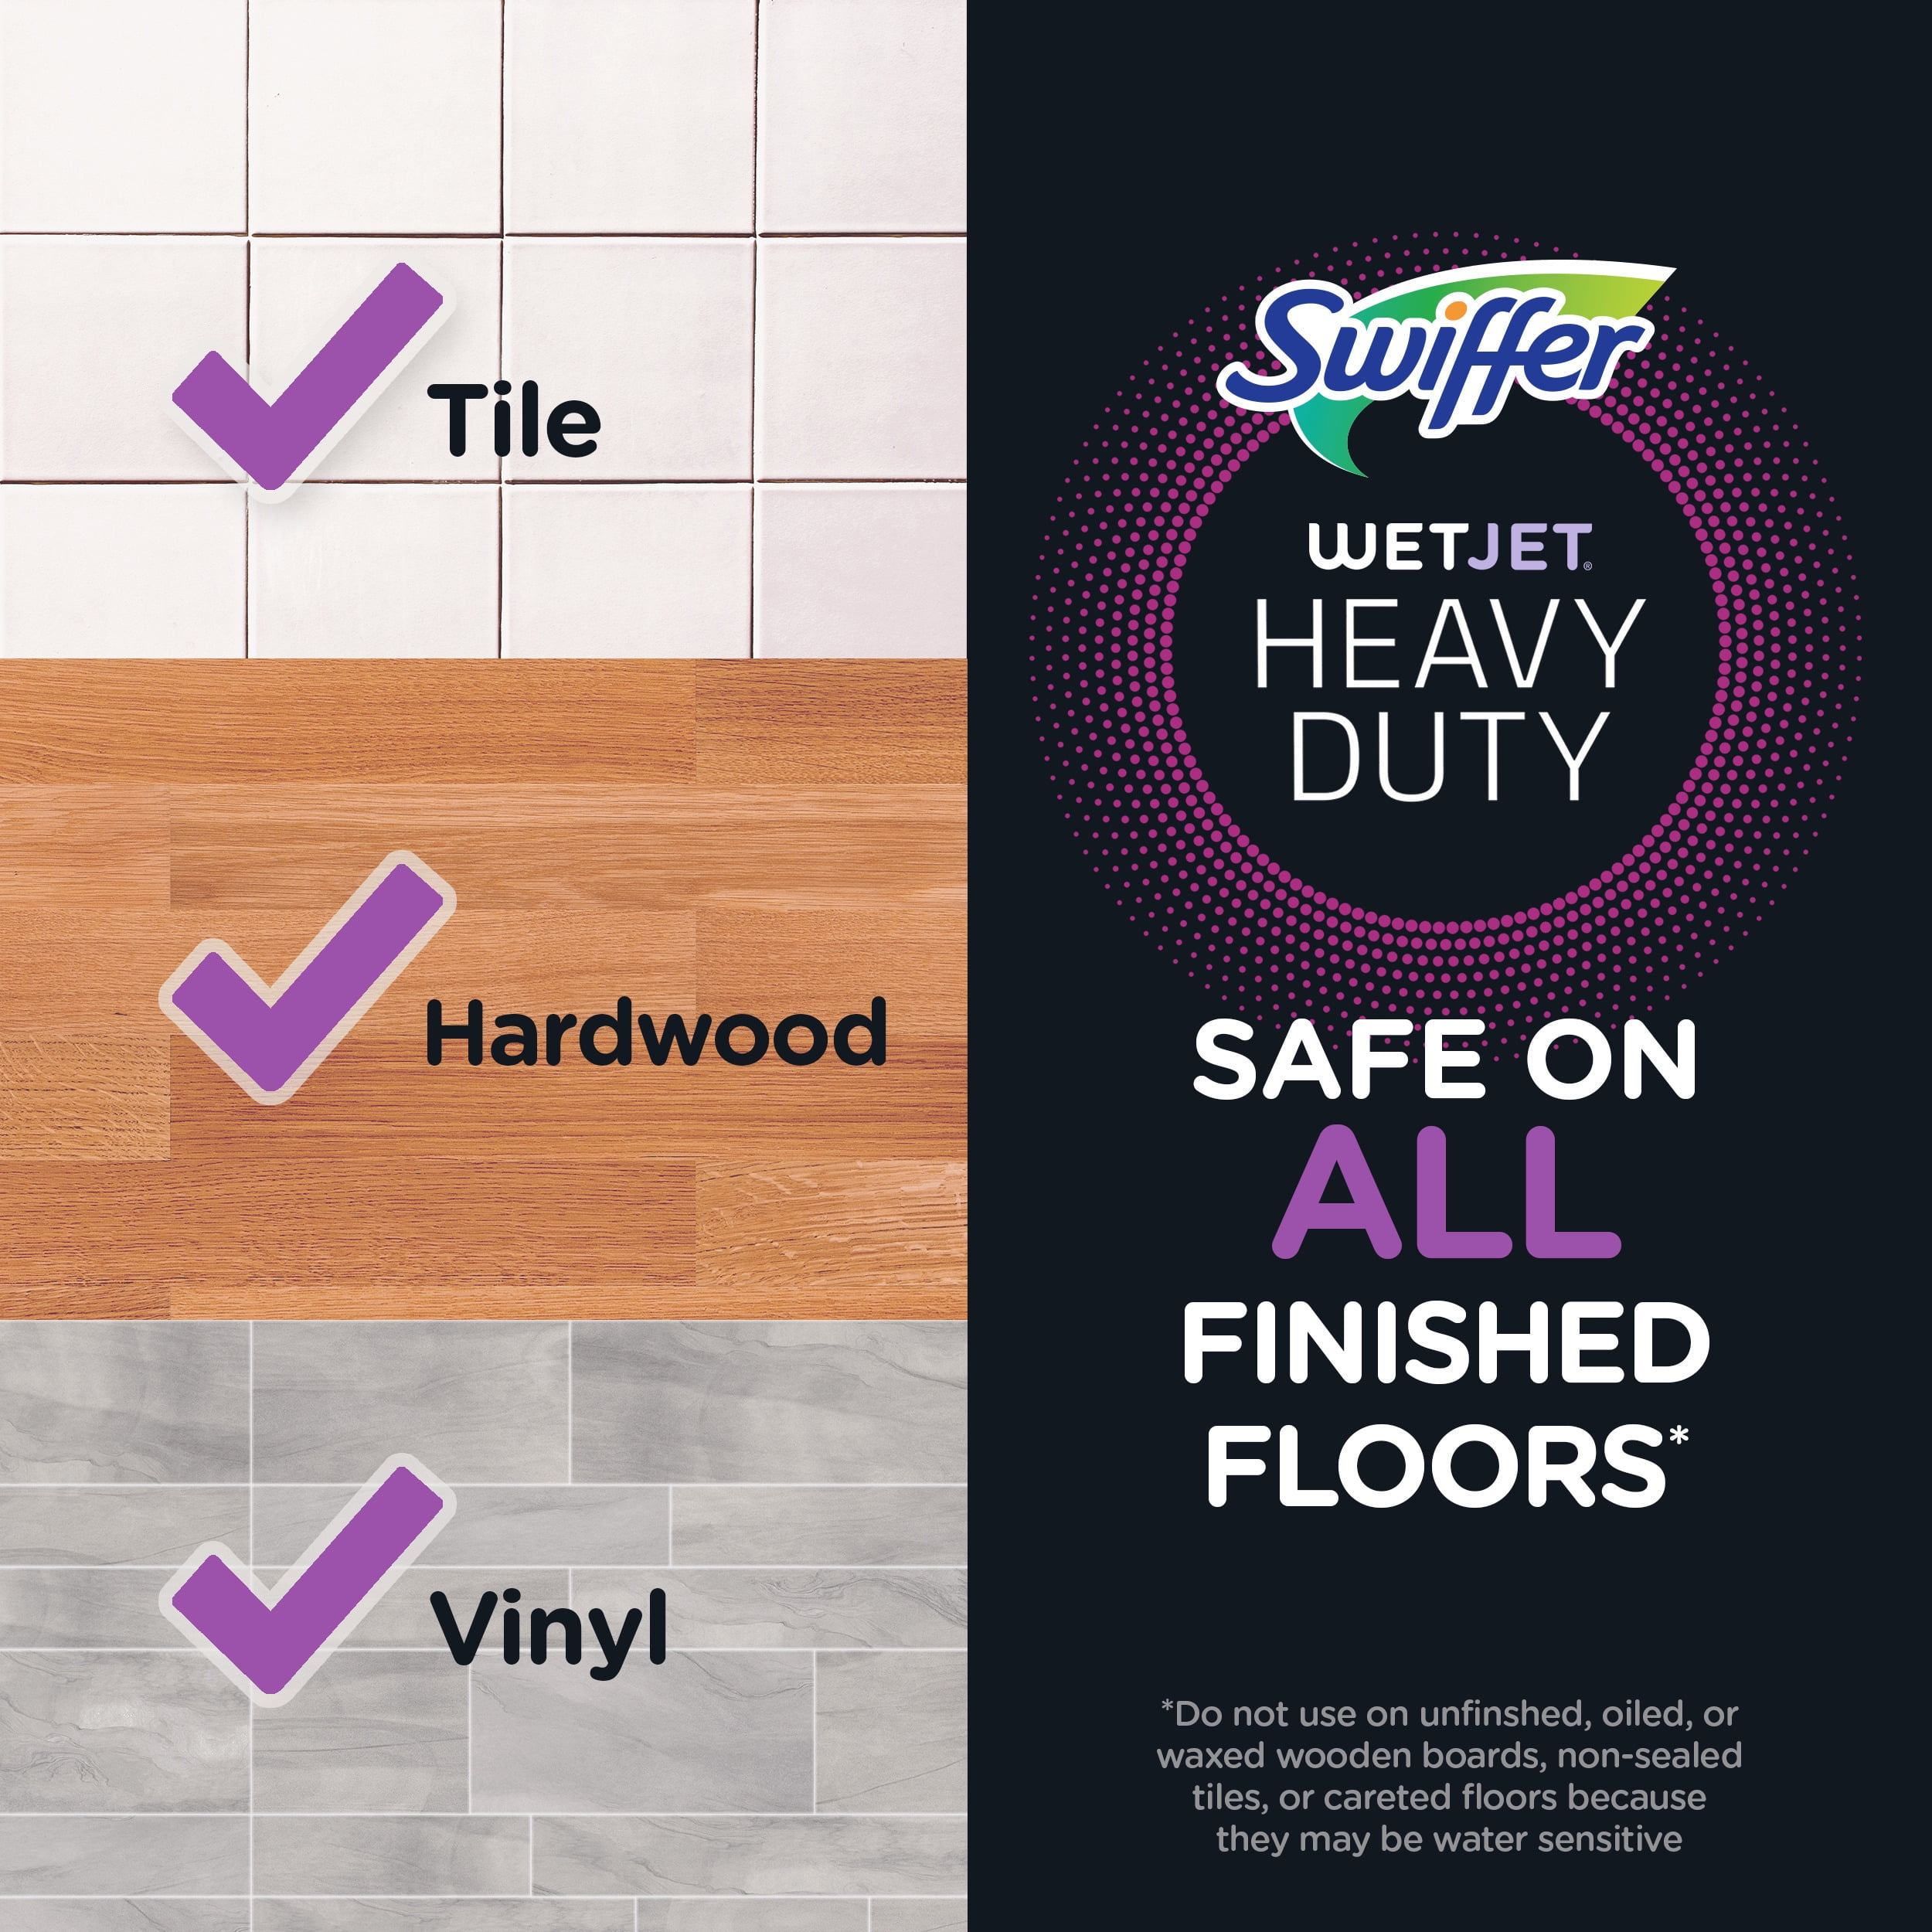 Swiffer WetJet Spray Mop Heavy Duty Mop Refills for Floor Mopping and Cleaning, All Purpose Multi-Surface Floor Cleaning Pads, 20 Count - image 6 of 10